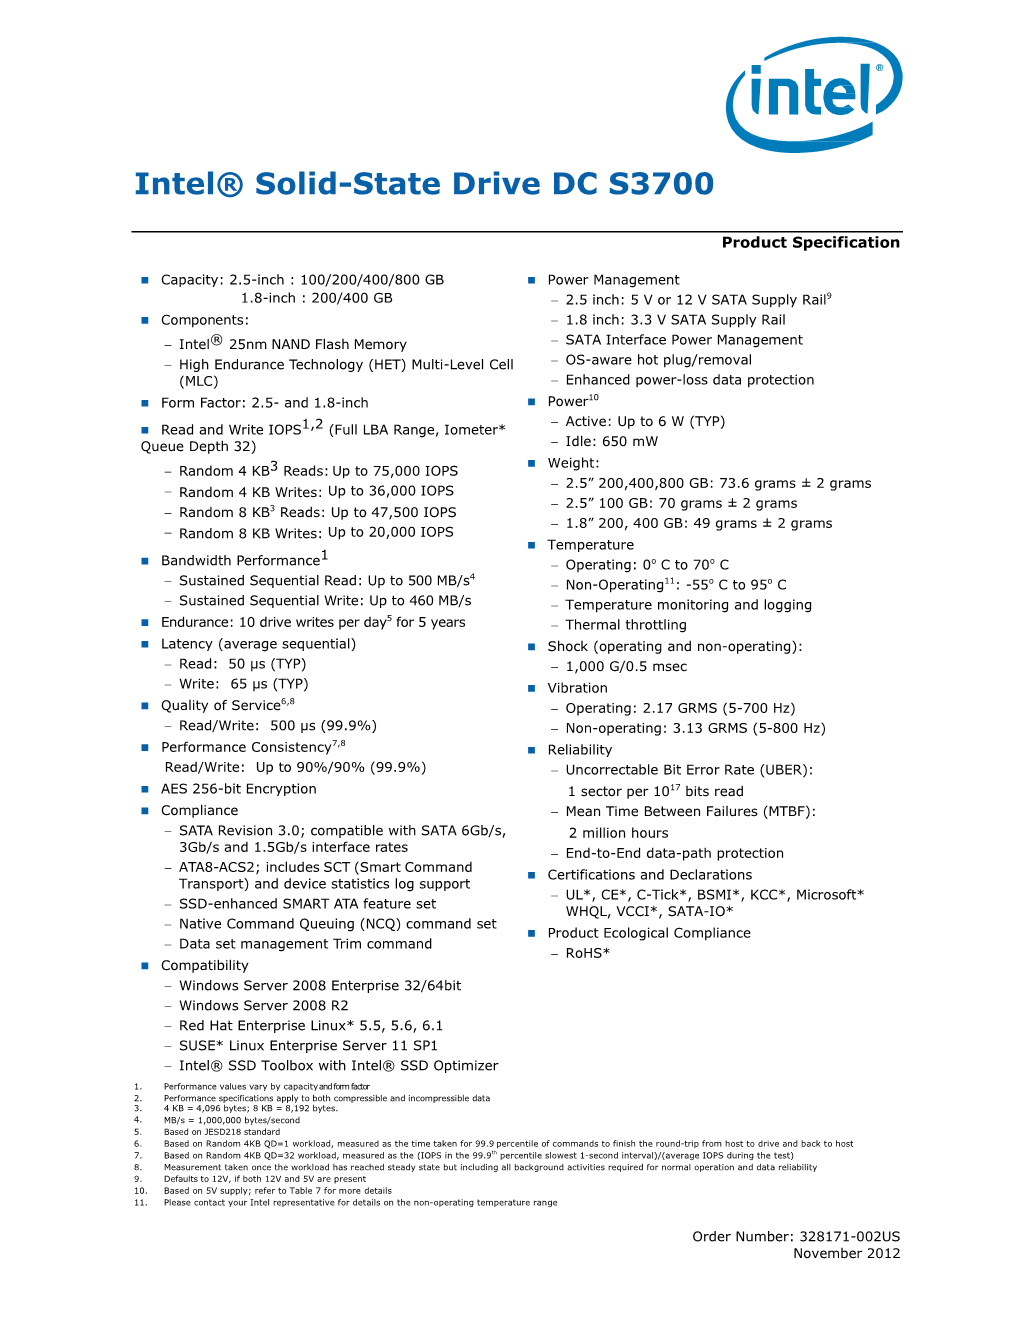 Intel® SSD DC S3700 Product Specification